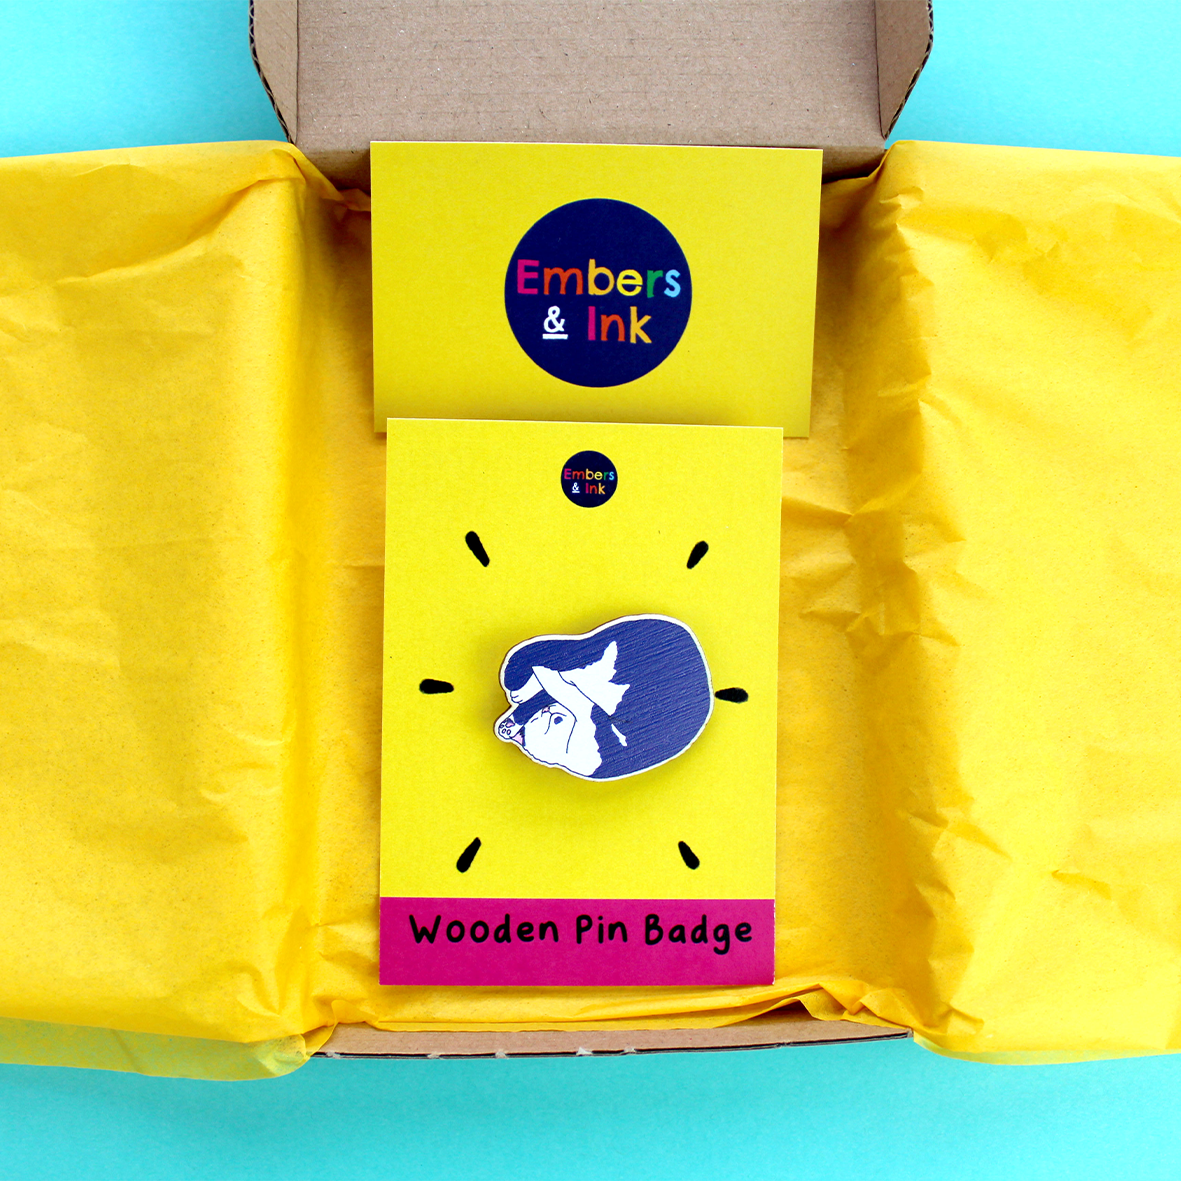 The wooden pink badge is shown attached to its cardboard backer, inside a cardboard box that is lines with yellow tissue paper, with an Embers and Ink business card. It shows that this pin badge is sent plastic-free.